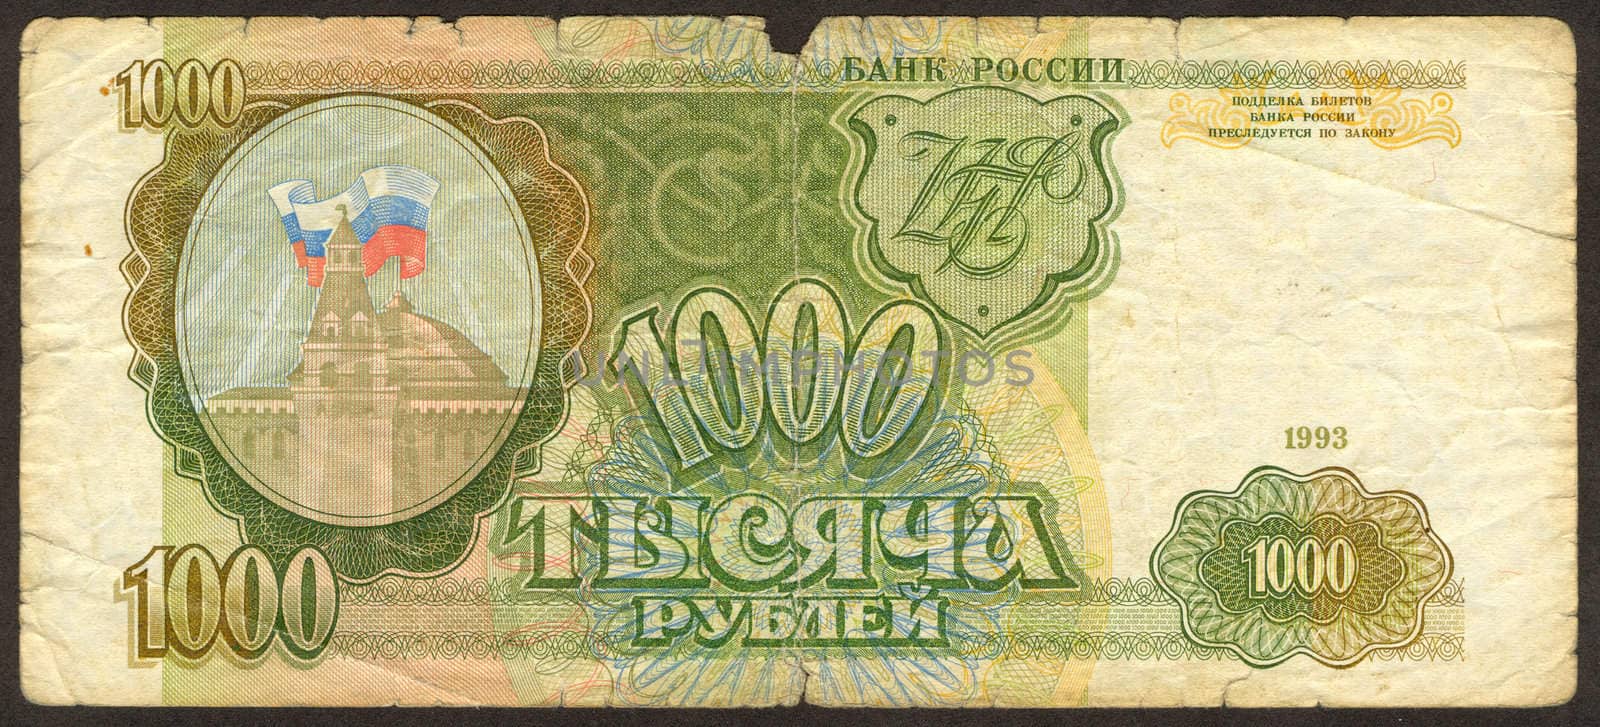 Banknote advantage one thousand roubles the back side by rook